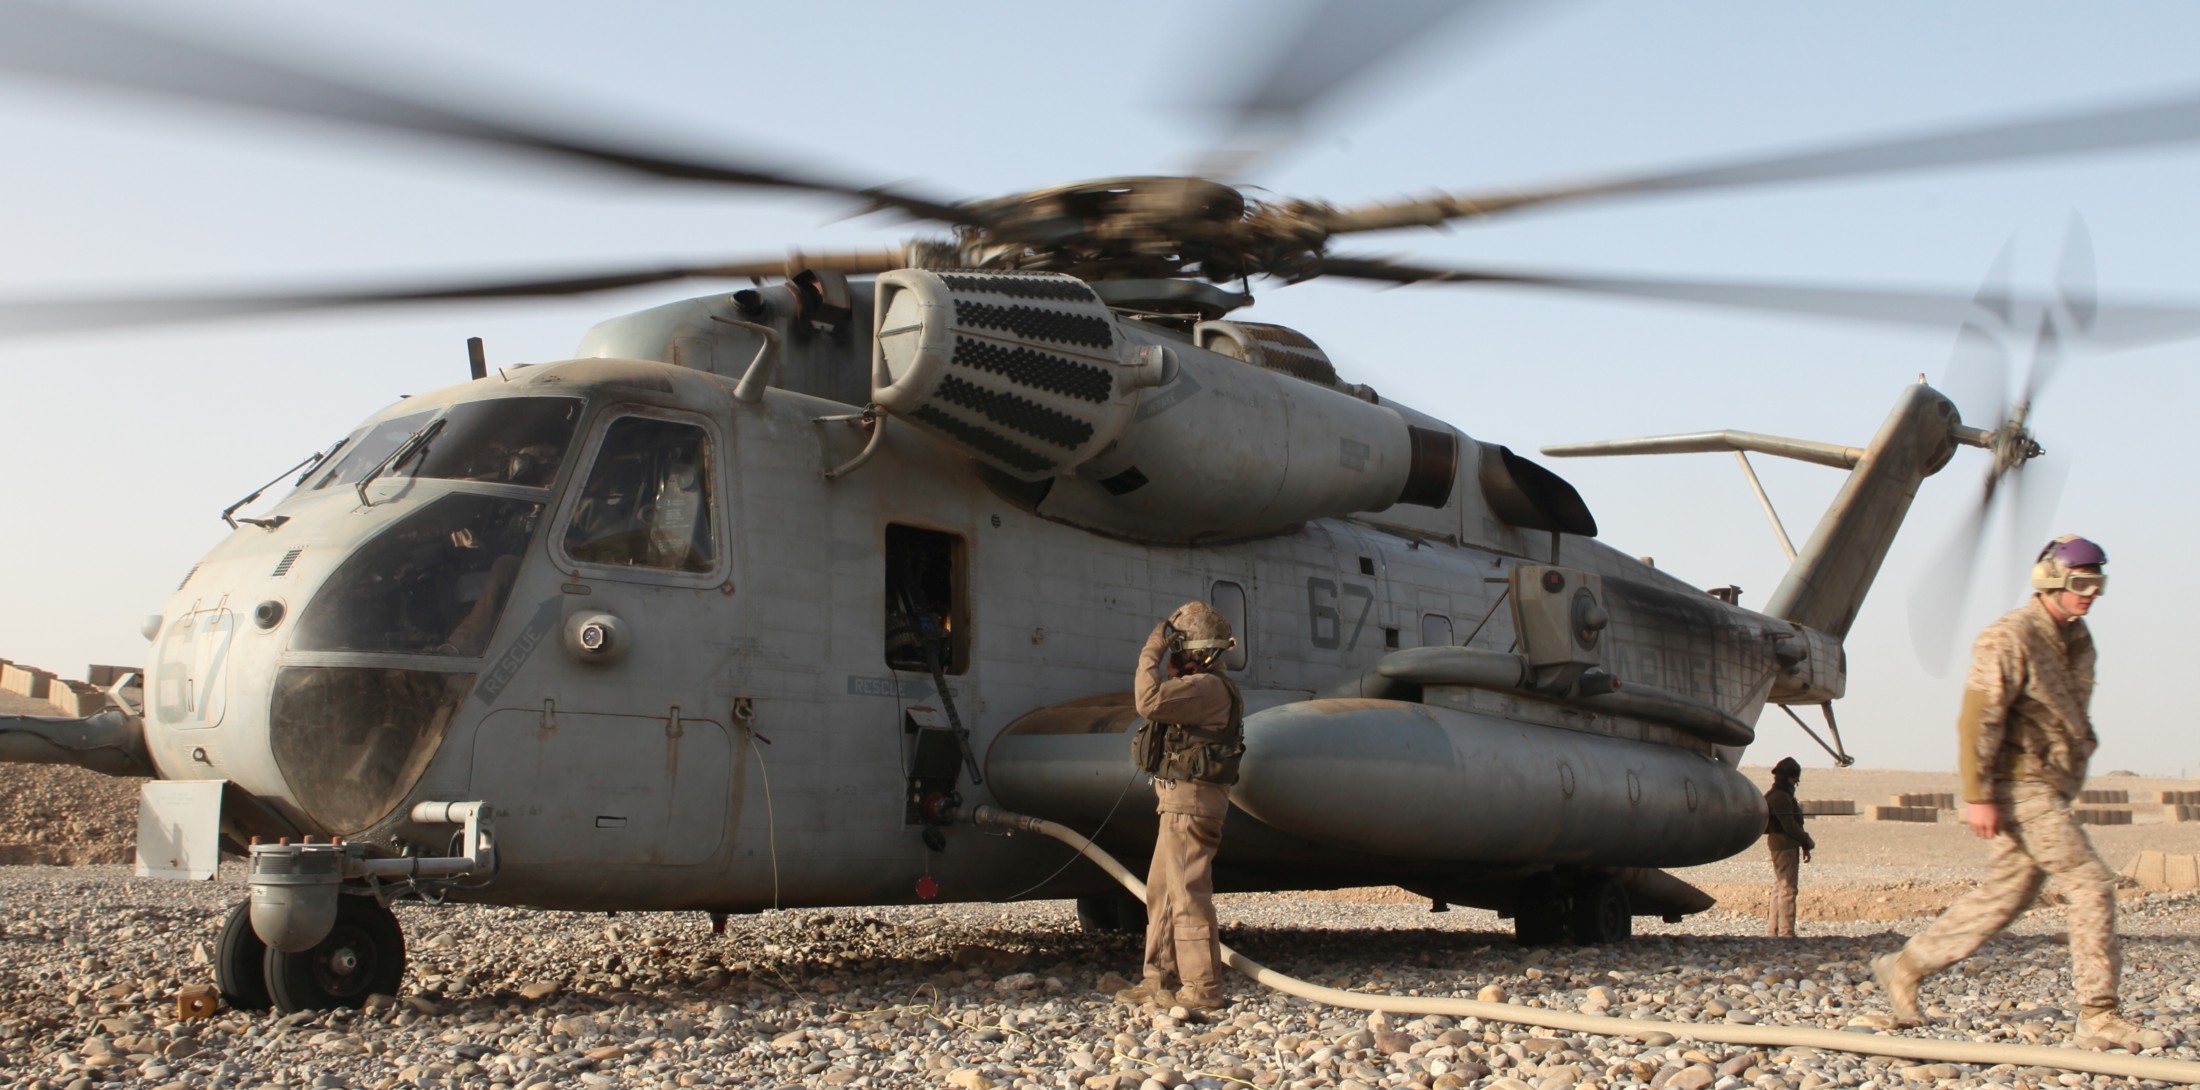 hmh-361 flying tigers marine heavy helicopter squadron usmc sikorsky ch-53e super stallion 09 helmand afghanistan